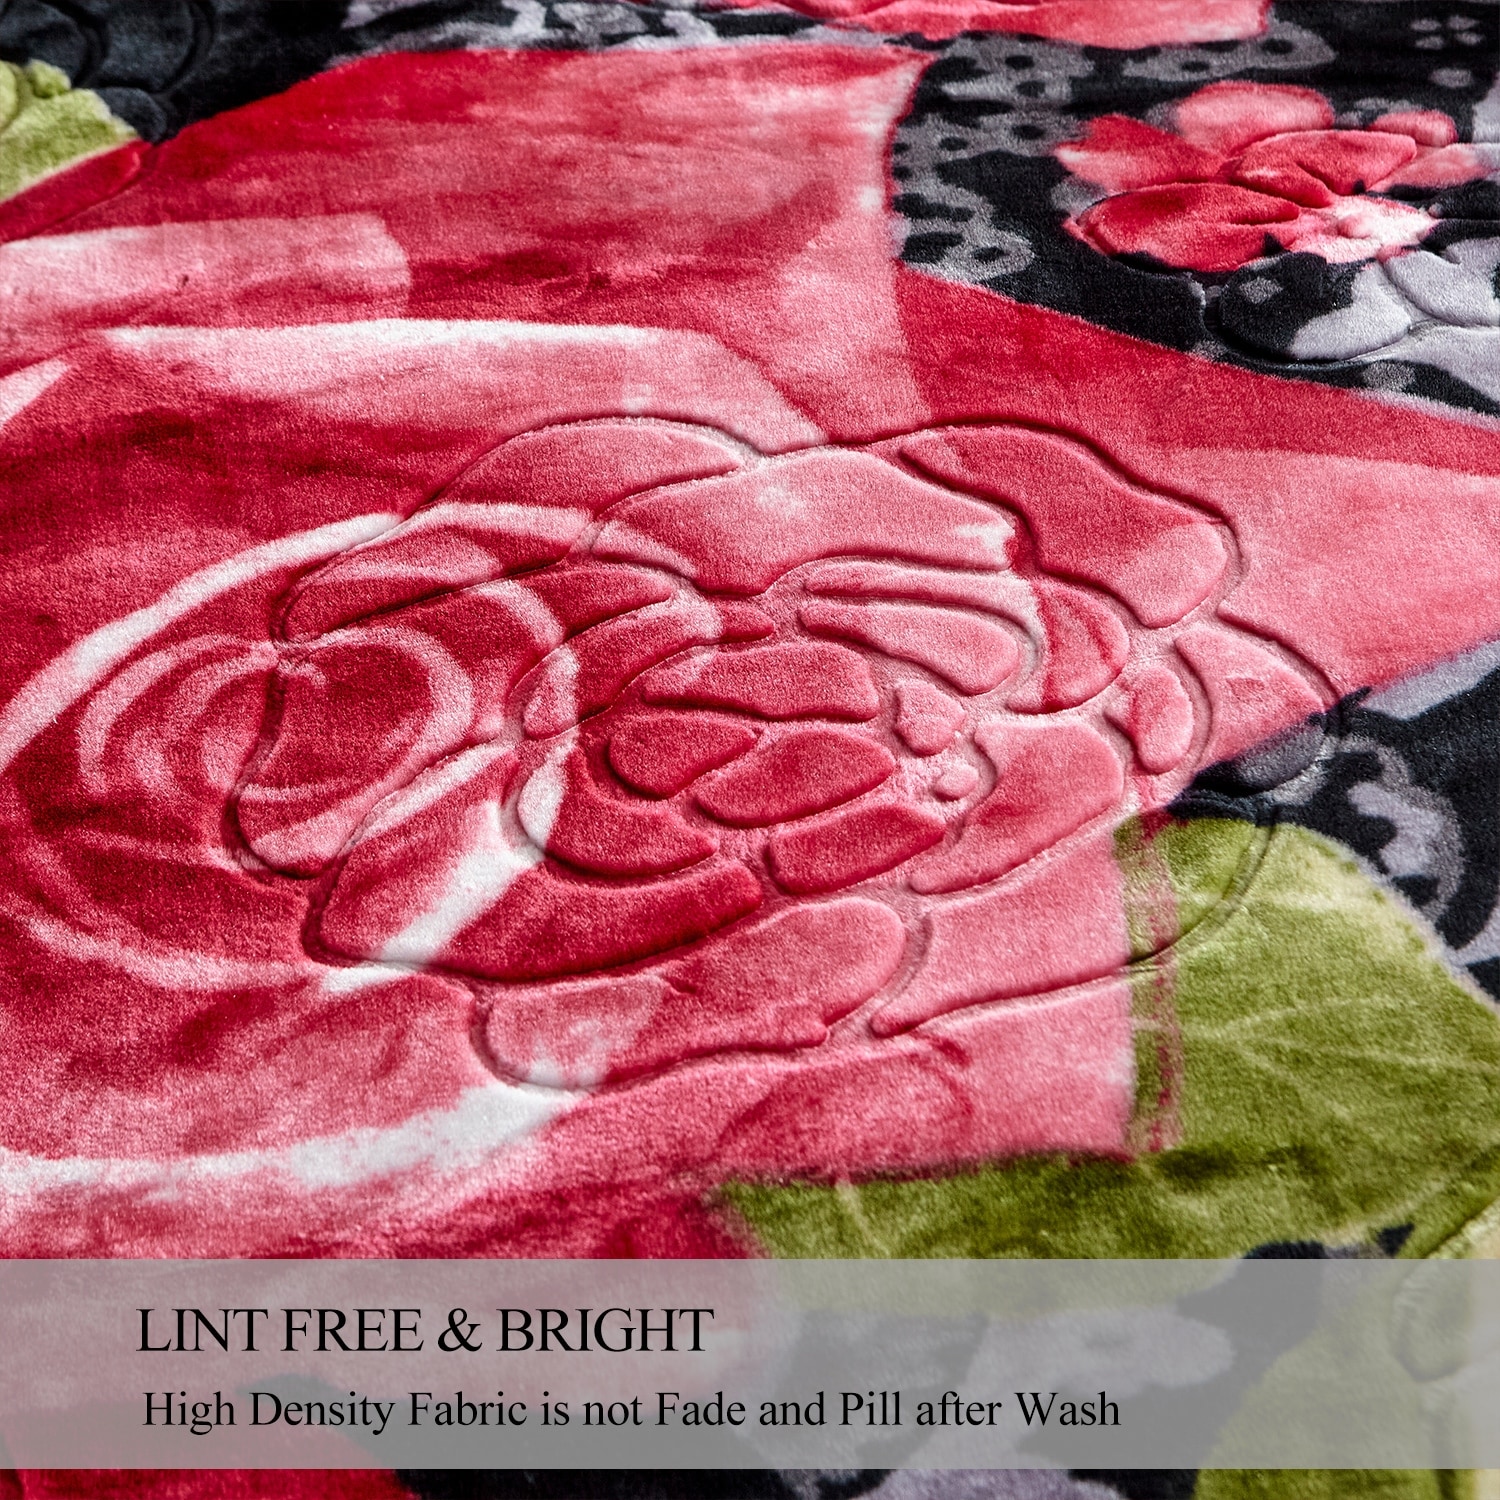 Heavy Crafted Thick Floral 9-pound Winter Fleece Blanket 85x95 - On Sale  - Bed Bath & Beyond - 32355550